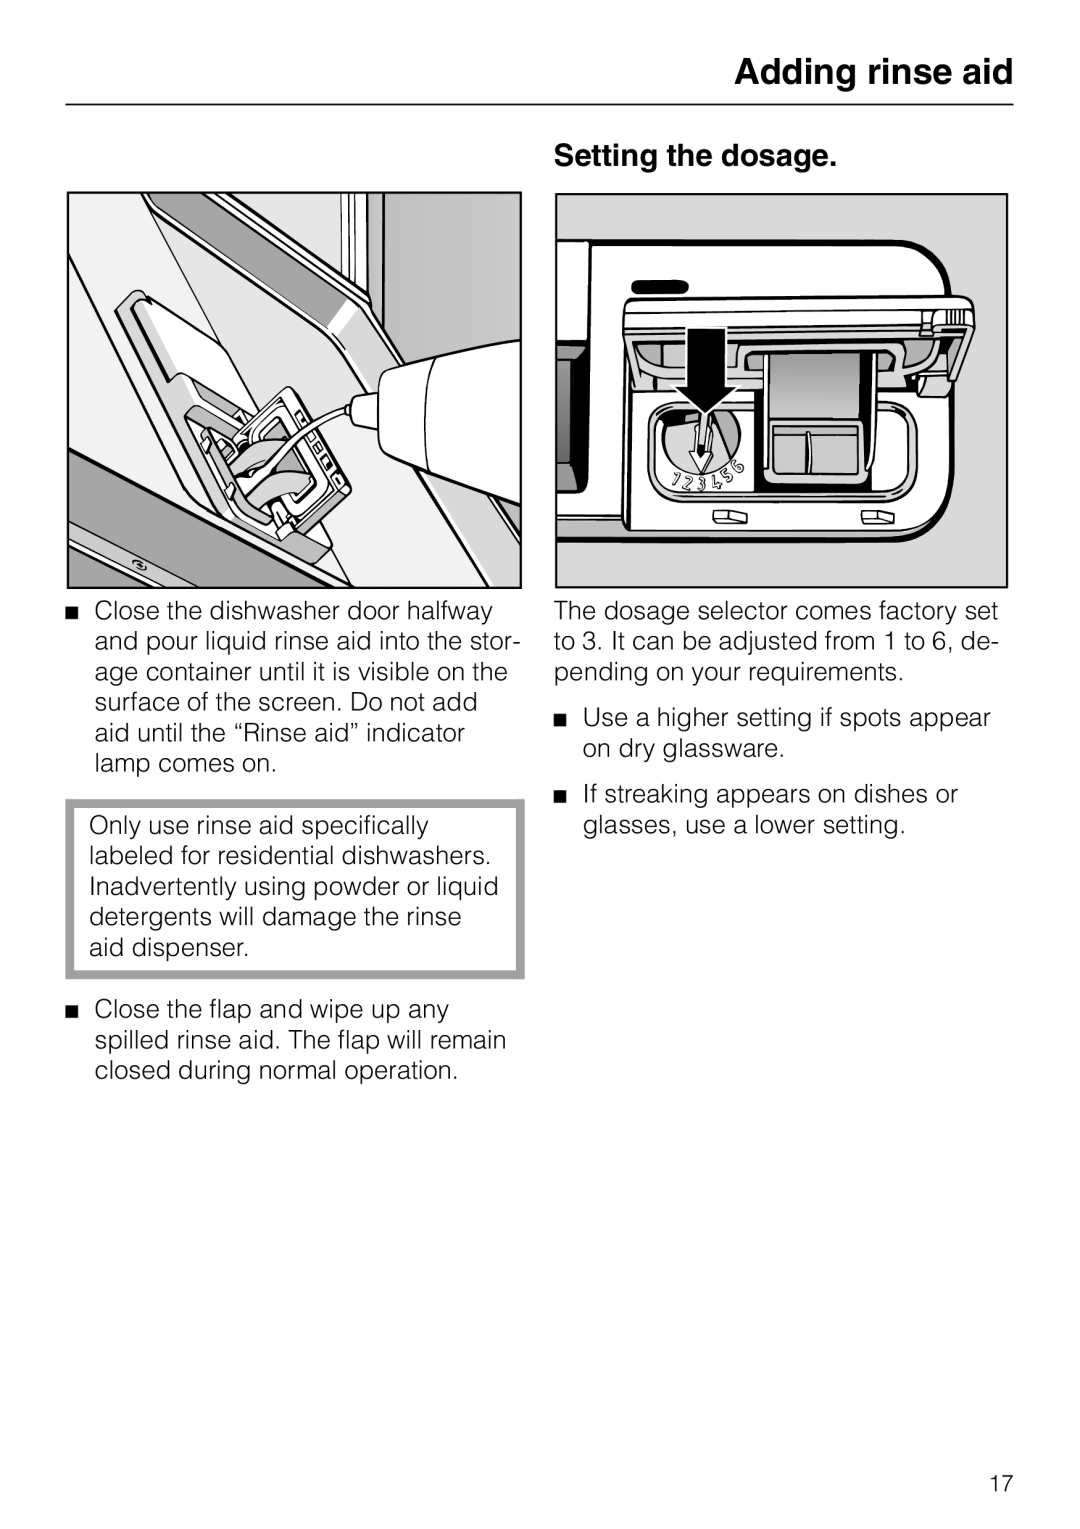 Miele M.-NR. 04 390 922 operating instructions Adding rinse aid, Setting the dosage 